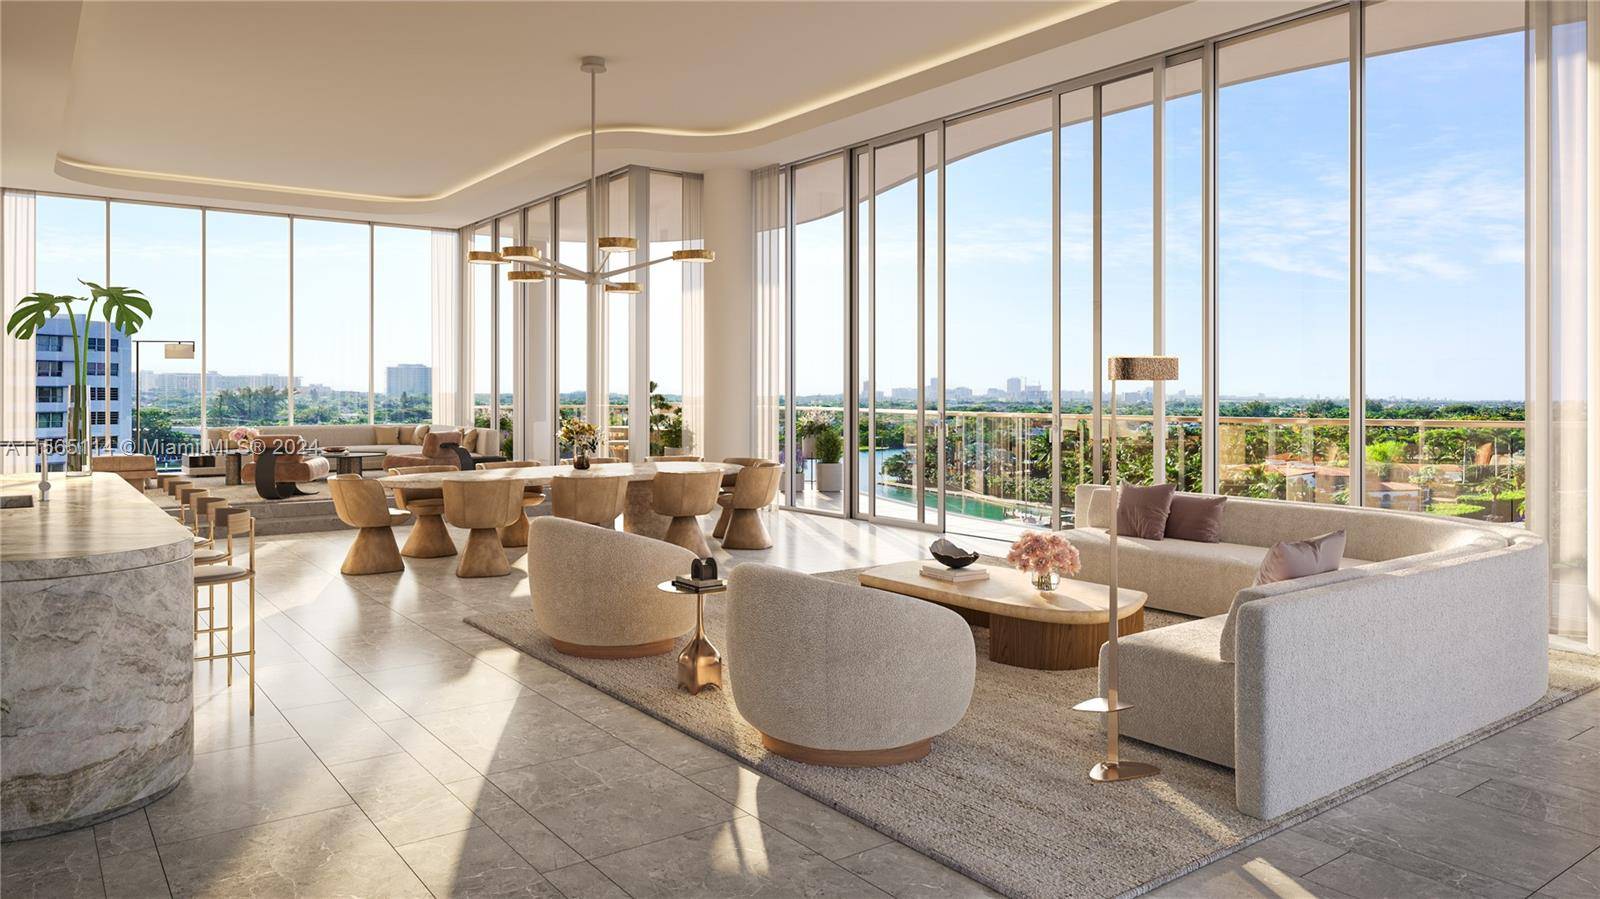 Residence Five, the largest home at Indian Creek Residences, encompasses a full floor with 5 bedrooms, 5 full baths, and 2 powder rooms within 6, 122 SF indoors, plus a ...